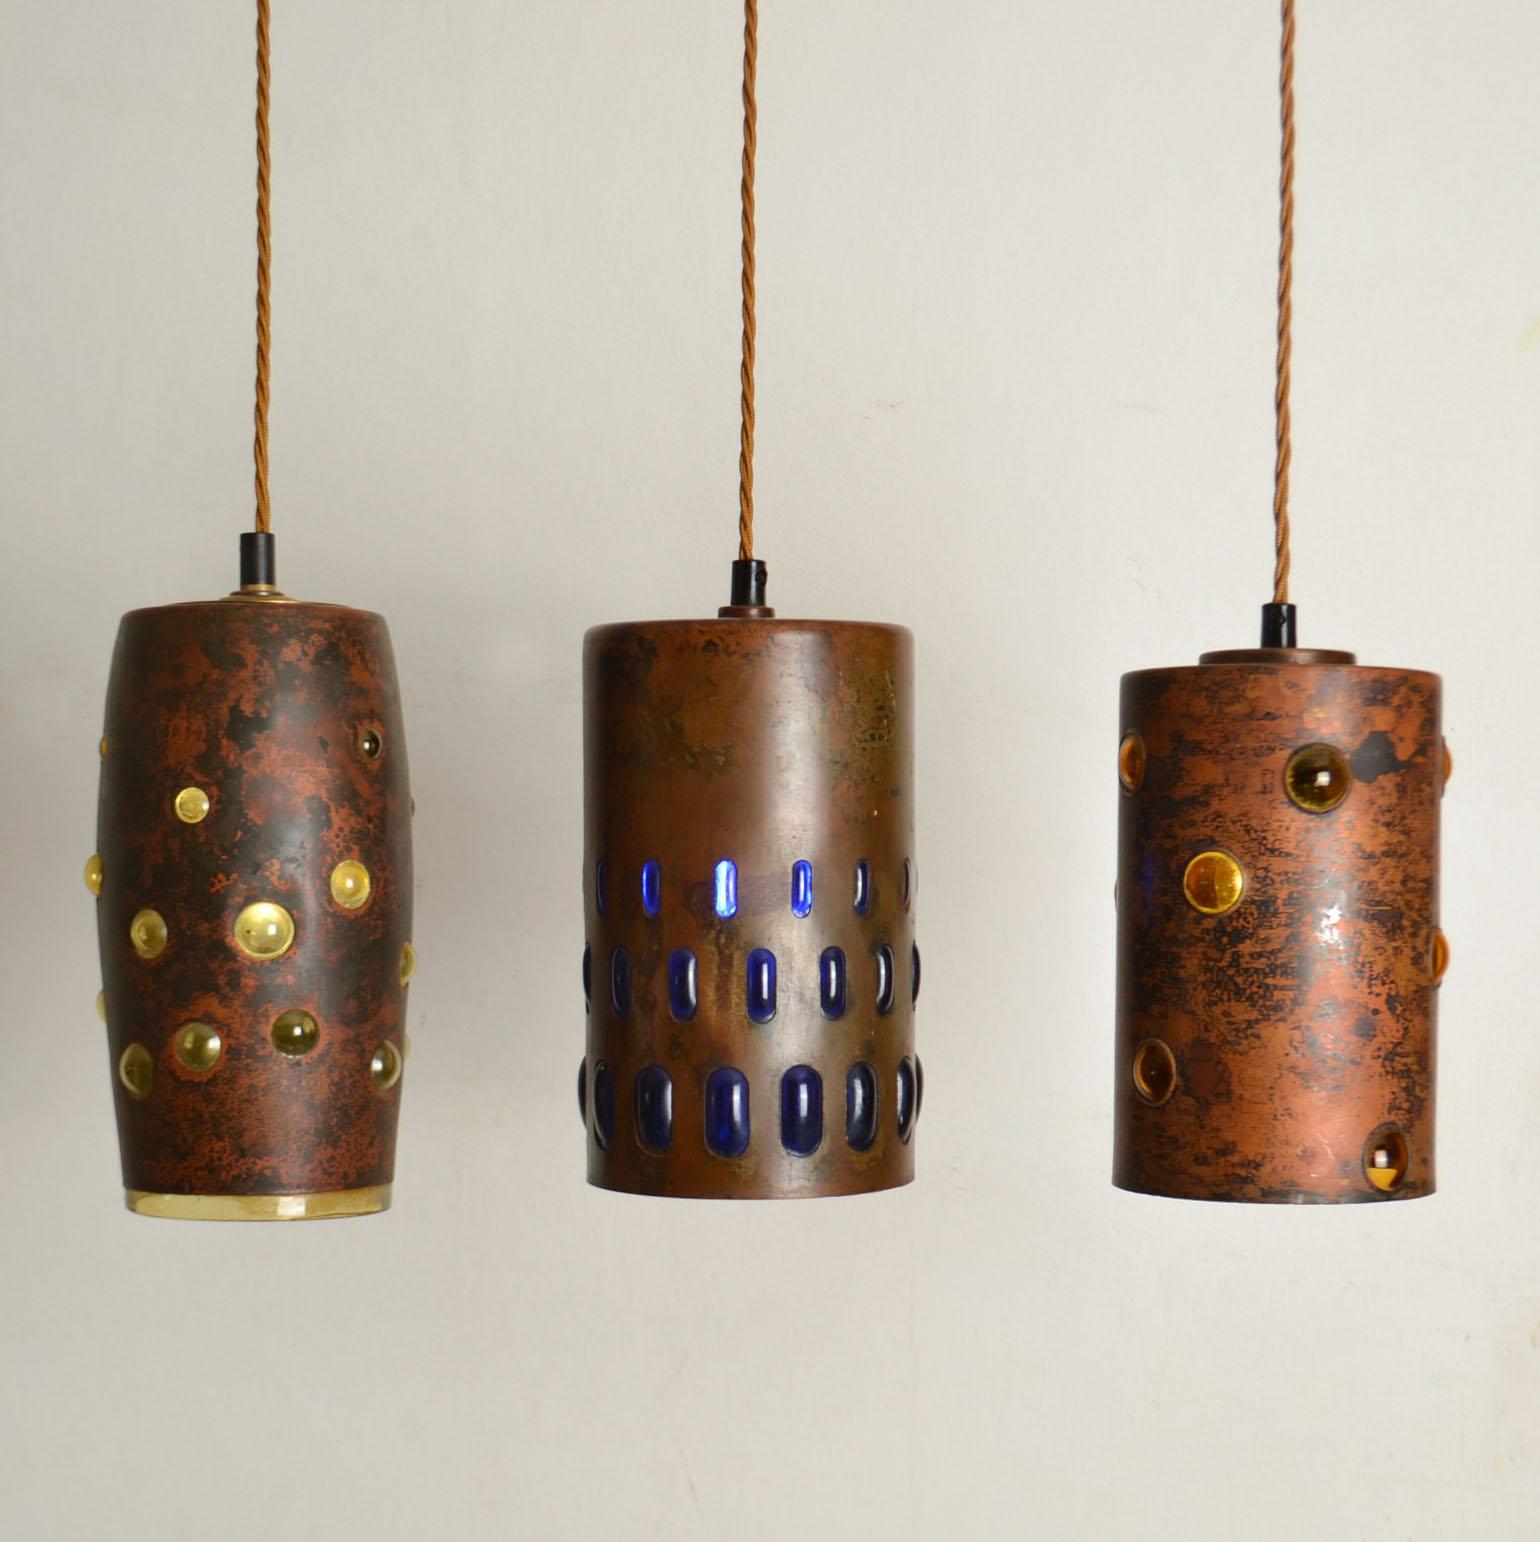 Dutch Group of Five Copper and Glass Pendant Lamps by Nanny Still for Raak